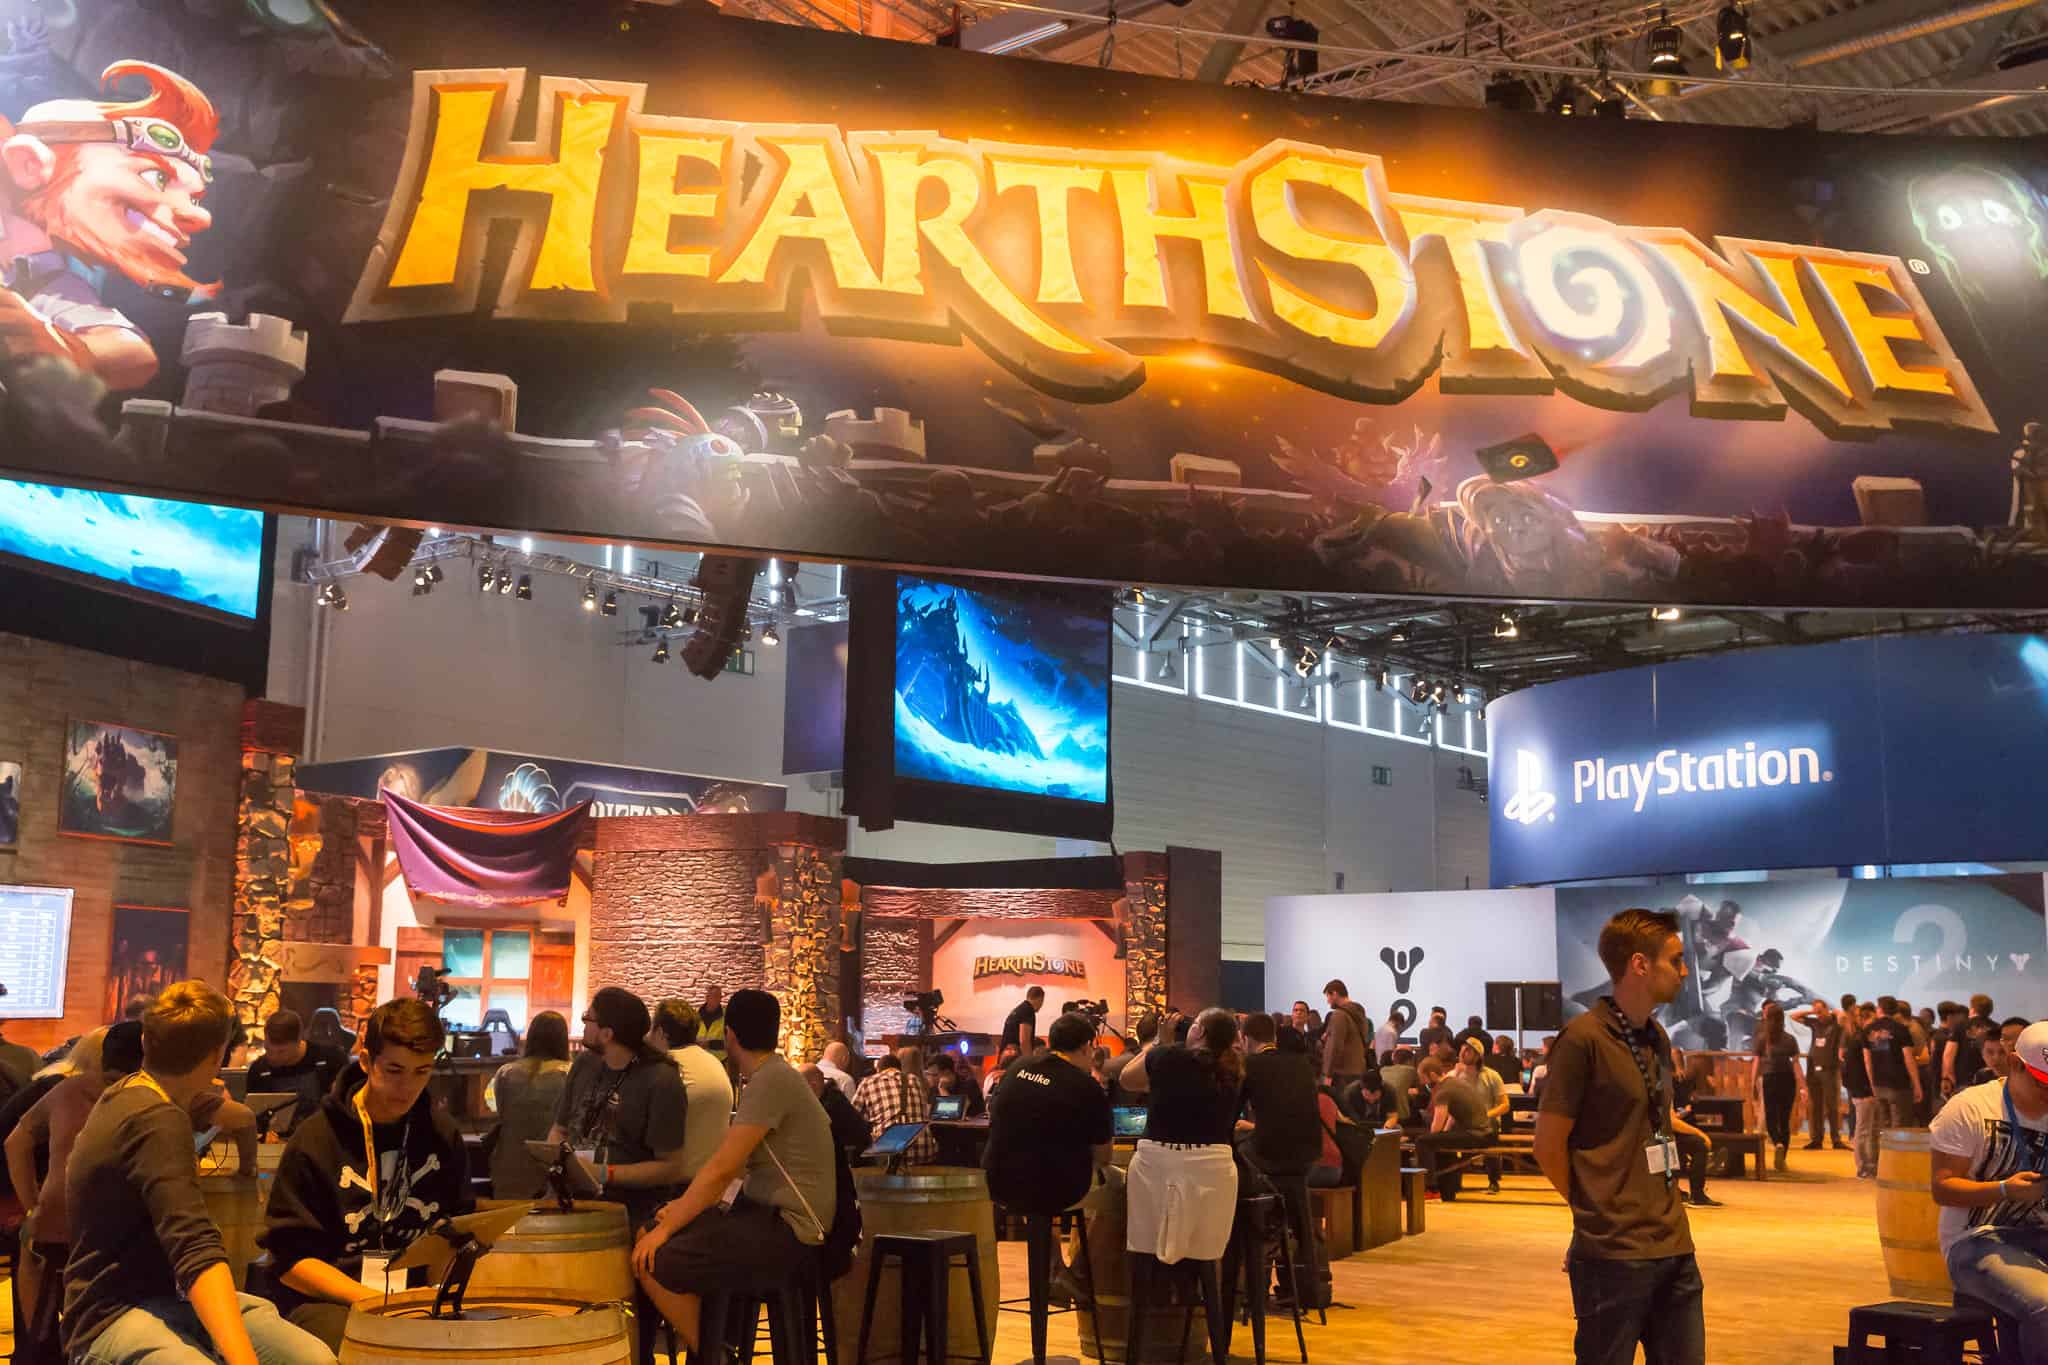 hearthstone data usage_how much internet does it use to play Hearthstone for online gaming